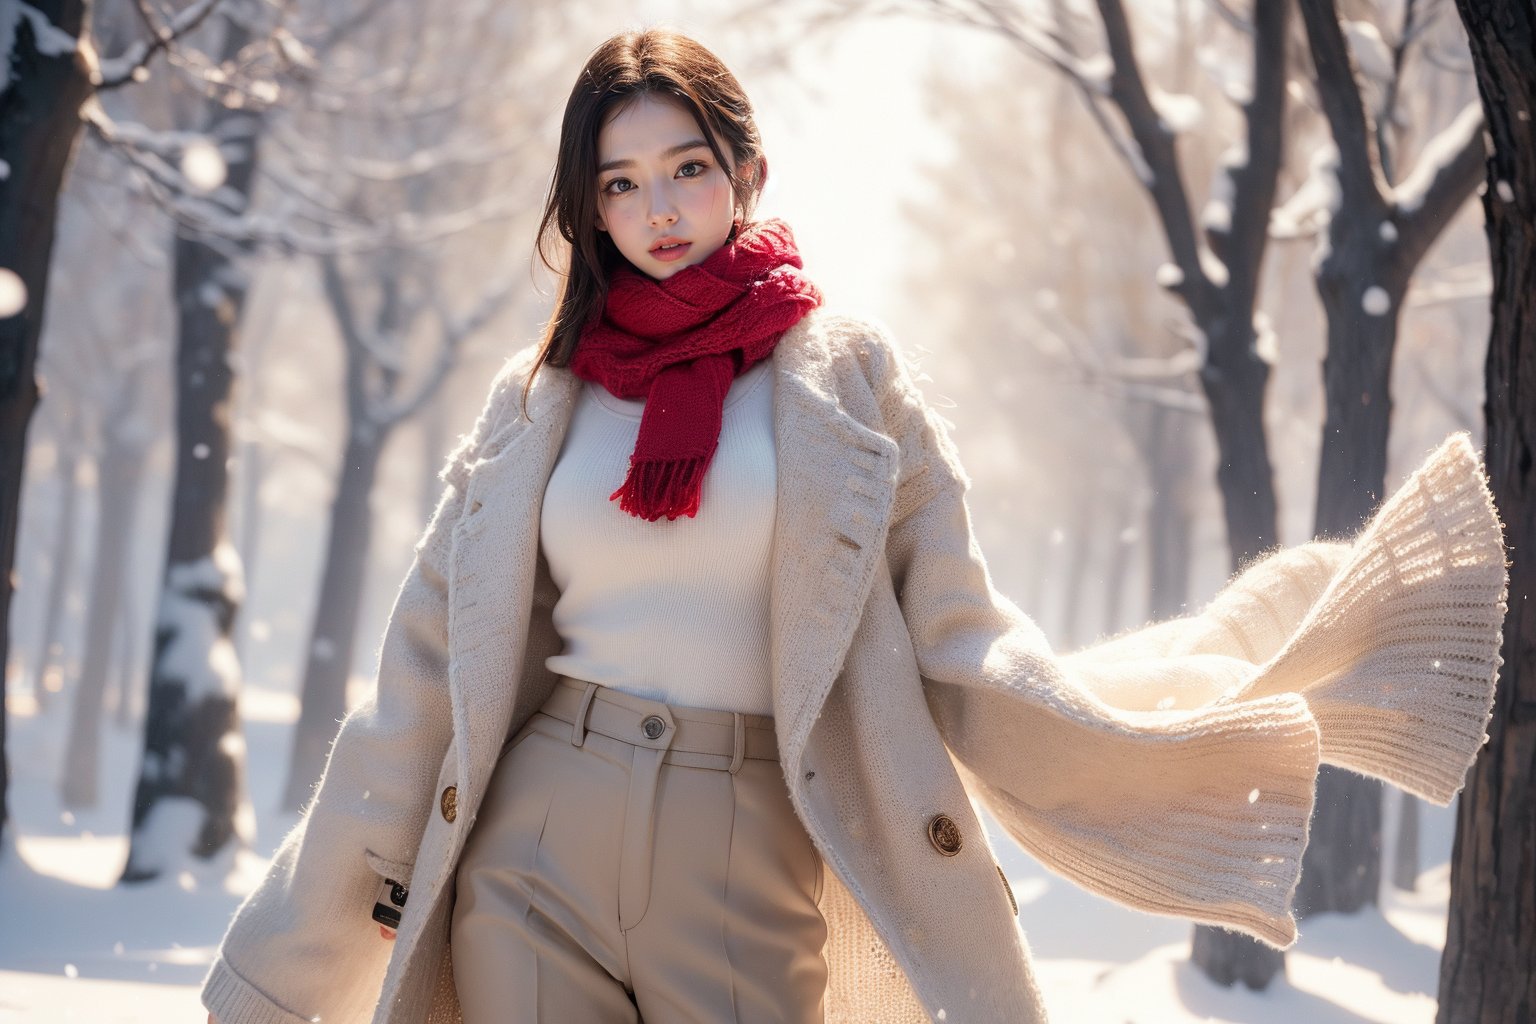 The image appears to be a digital photo, a panoramic view showing tall, slender trees in a vast snow-covered forest. In the snow. Their trunks form rhythmic patterns that add depth to the scene. 1 girl, noticeable but not dominant. (((She wears a white knitted sweater, beige coat with plush trim and a red scarf, fitted trousers))). White woolen gloves. Standing on the snow. Snowflakes fell gently around her, adding to the winter atmosphere. The overall atmosphere of the picture is tranquil and somewhat ethereal, with the focus being on the gentle expression of the protagonist and the tranquil winter scenery.